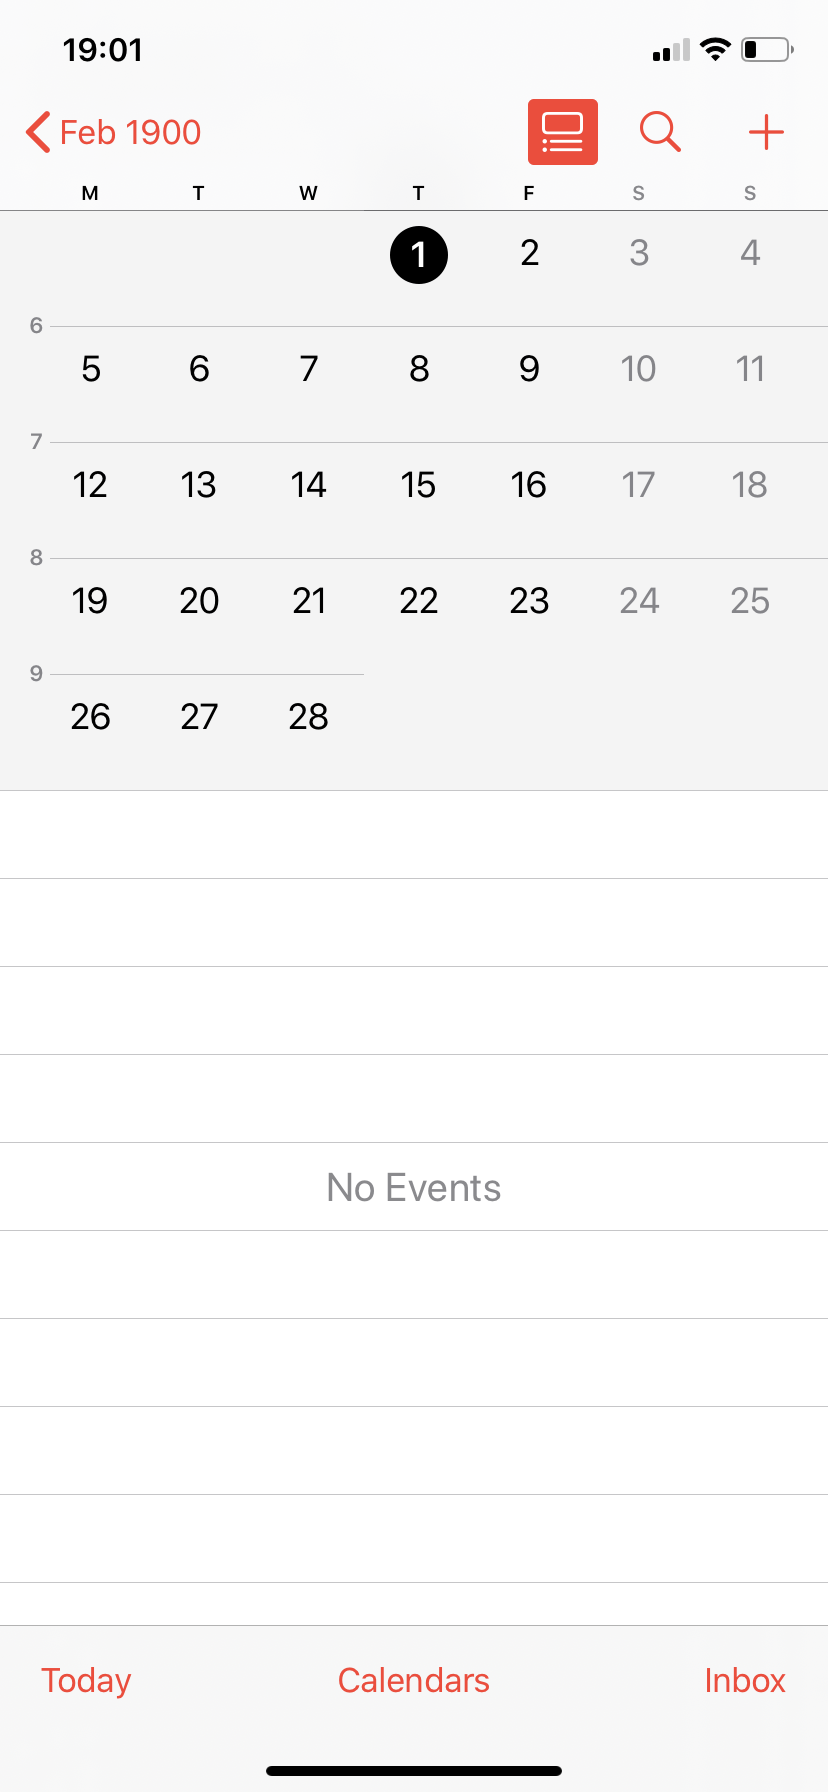 Screenshot of iOS
calendar app, showing the month view for the February 1900, with 28 days.